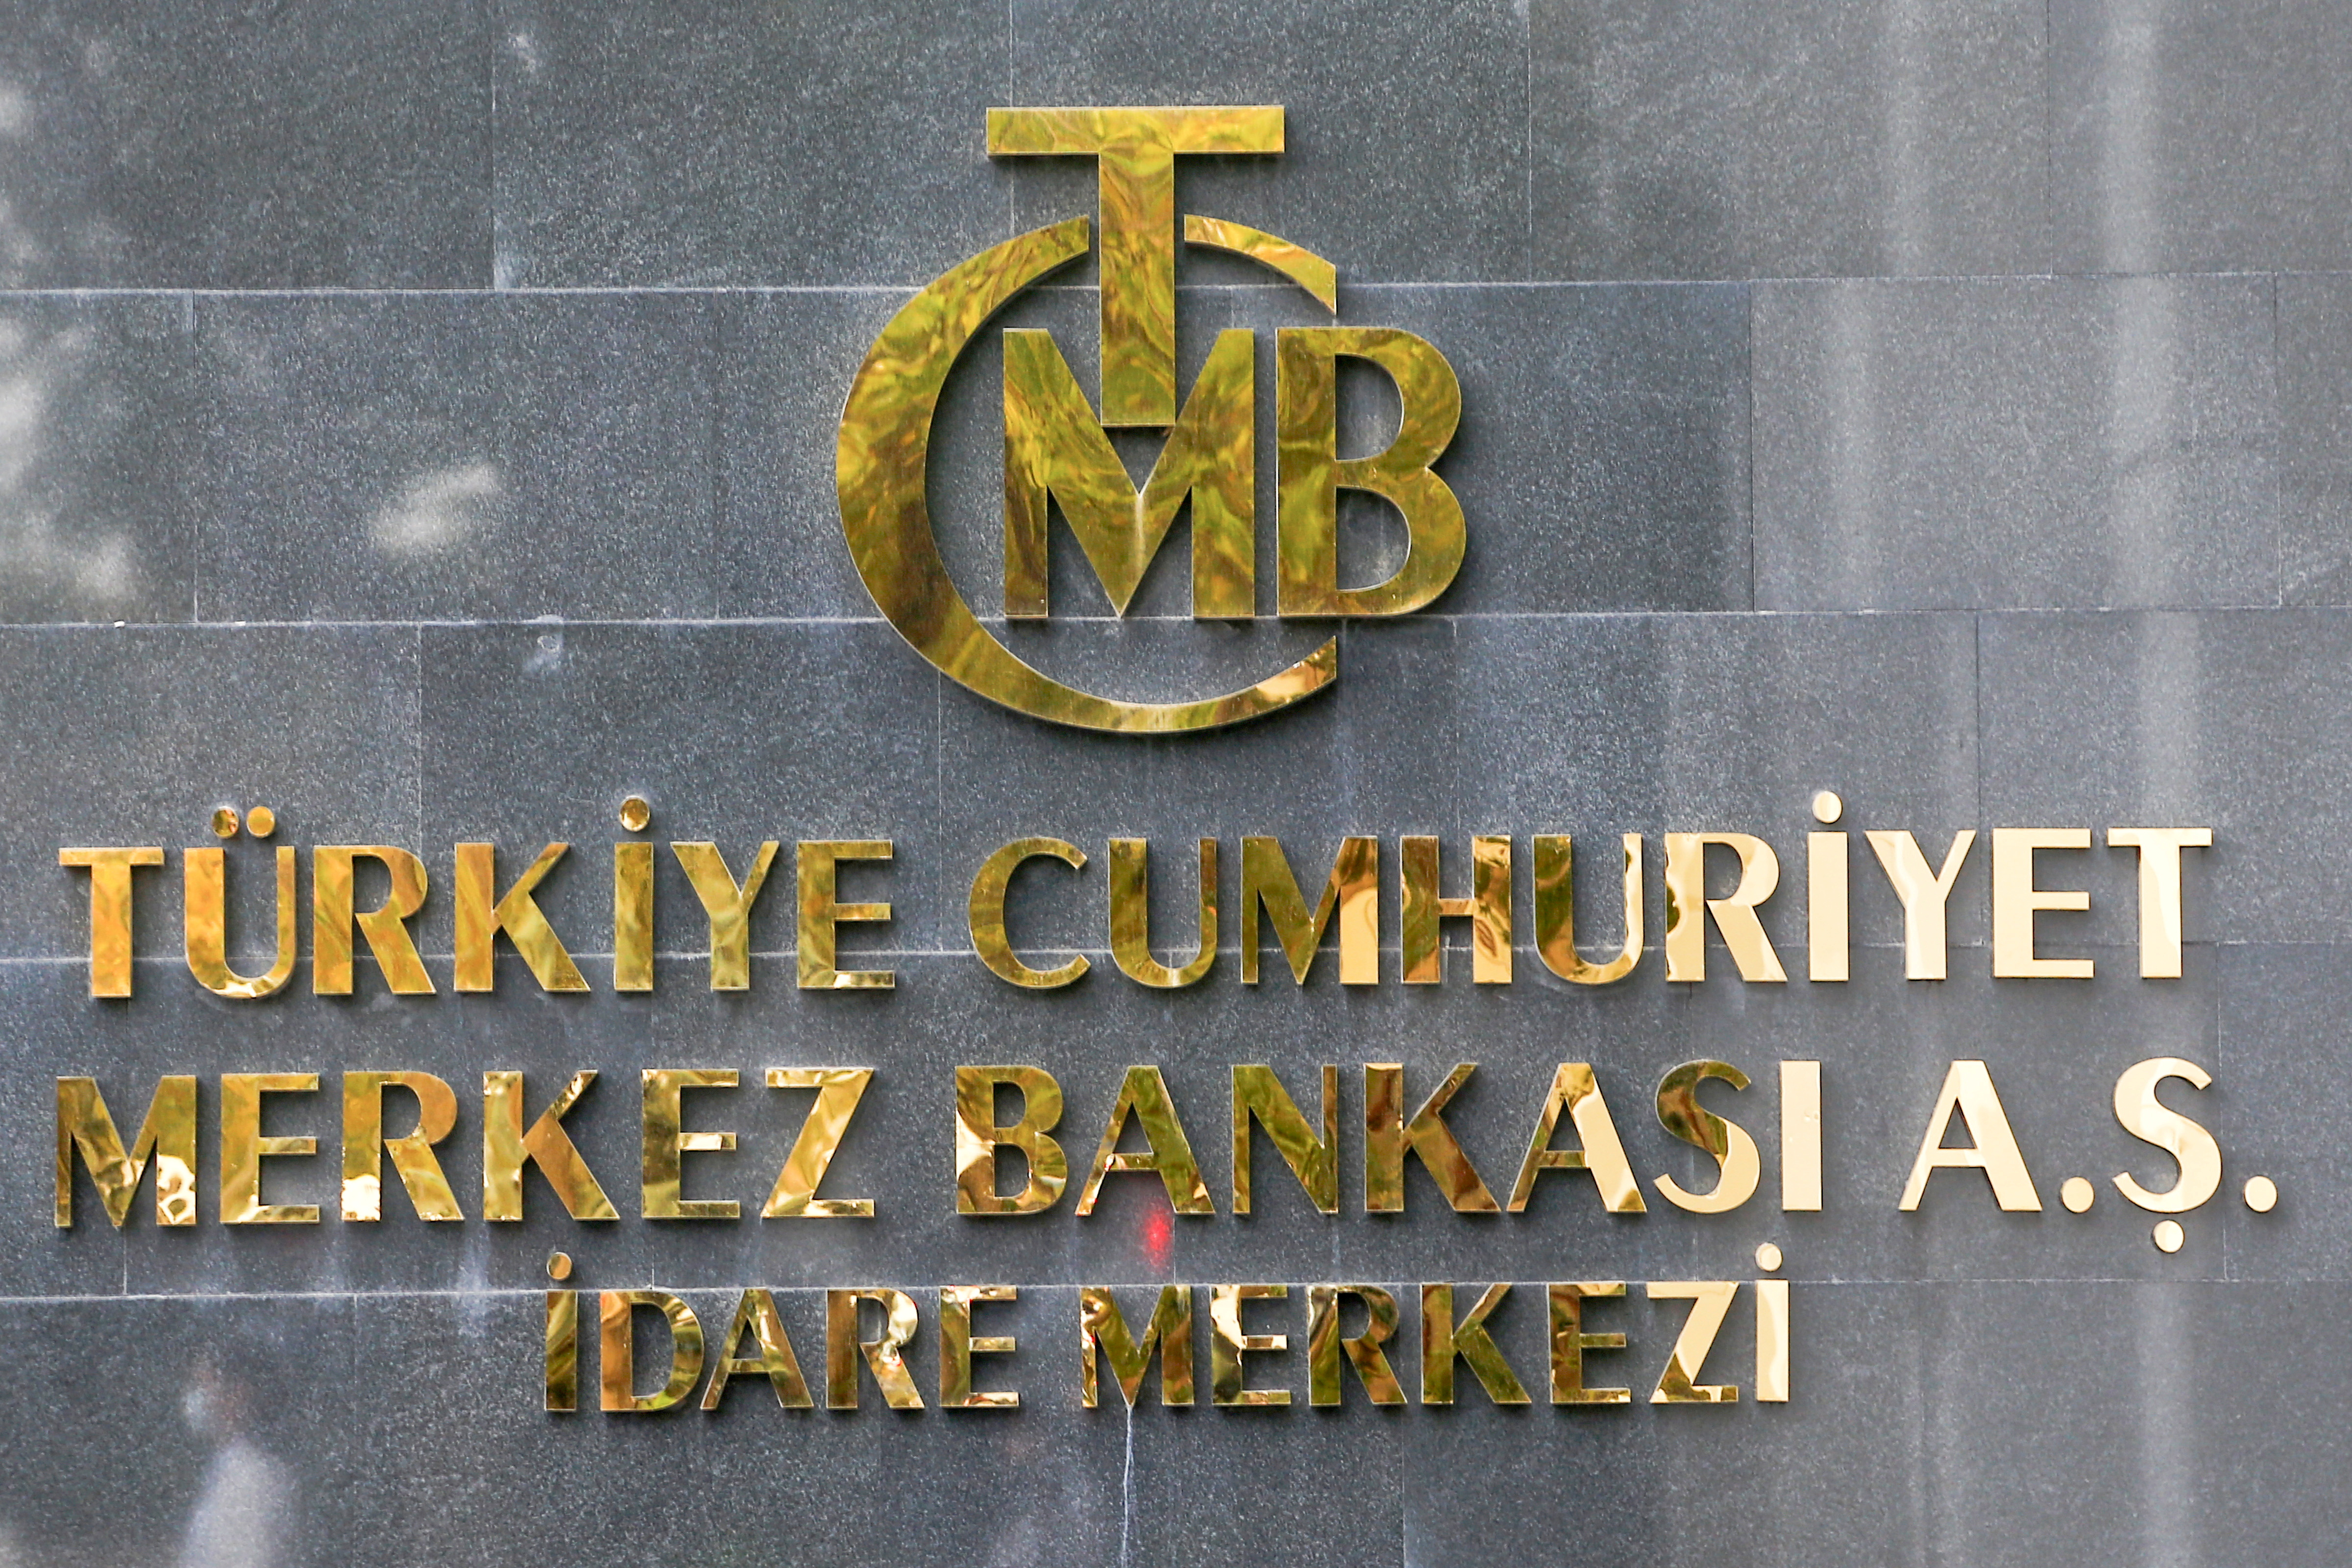 A logo of Turkey's Central Bank is pictured at the entrance of its headquarters in Ankara, Turkey October 15, 2021. REUTERS/Cagla Gurdogan